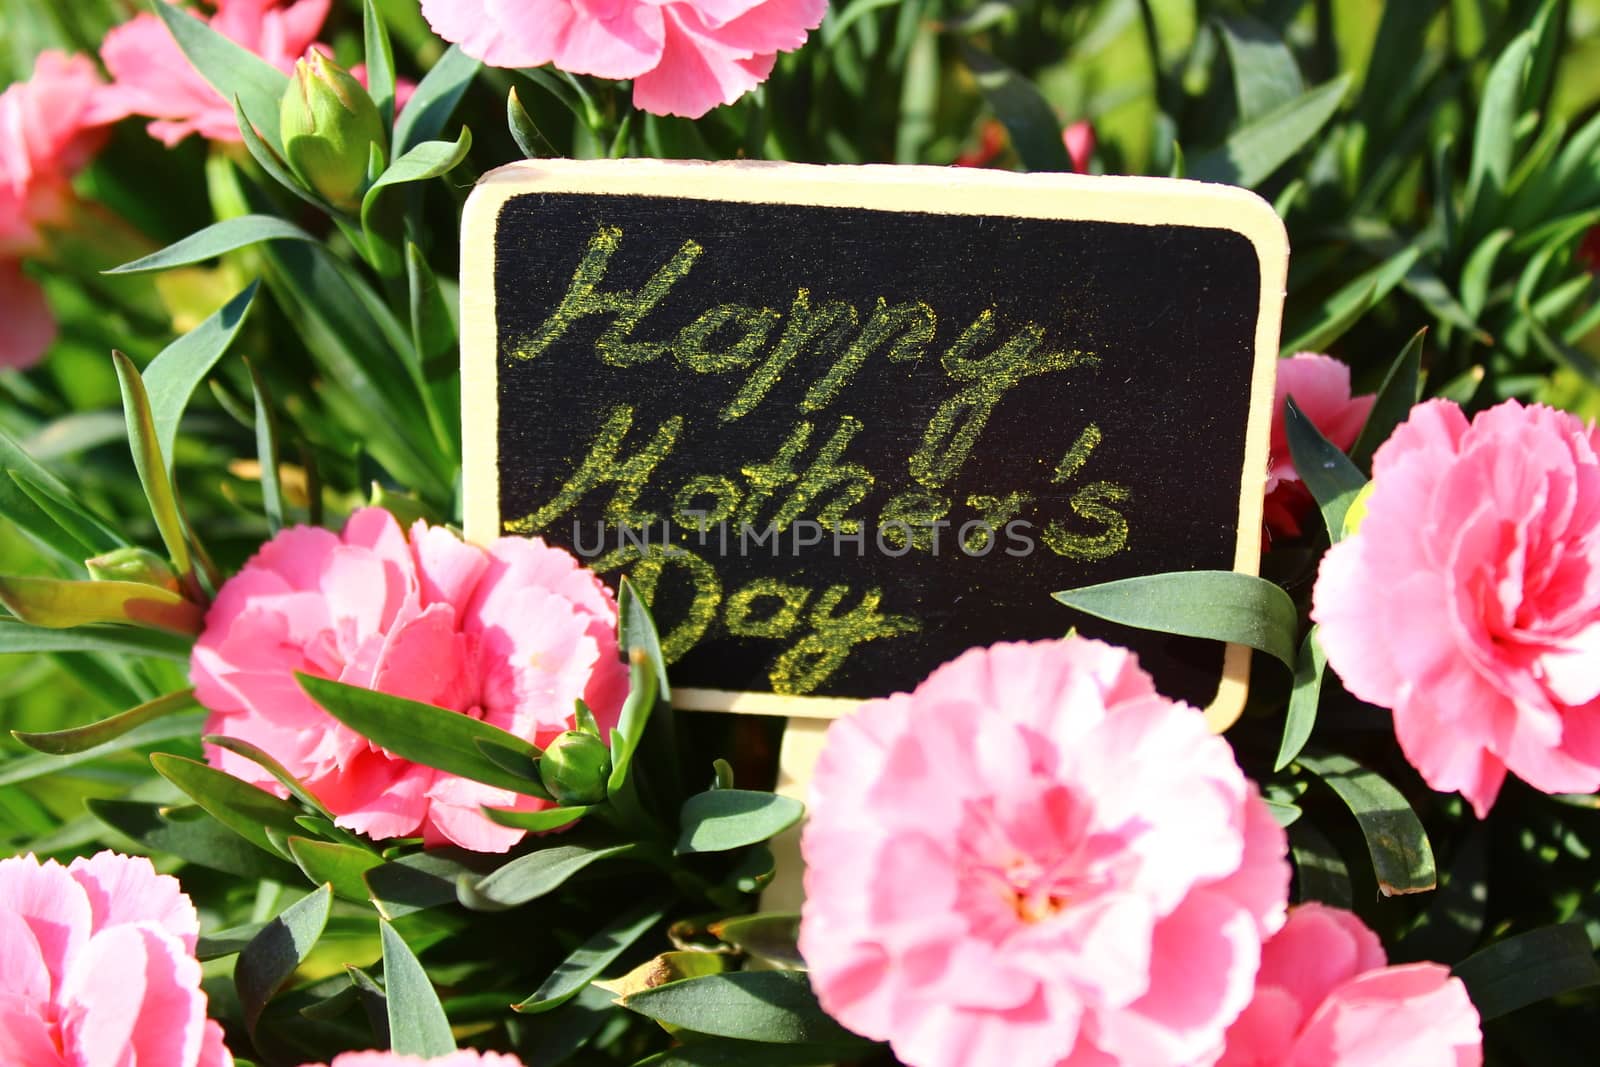 The picture shows happy mothers day greeting with flowers.